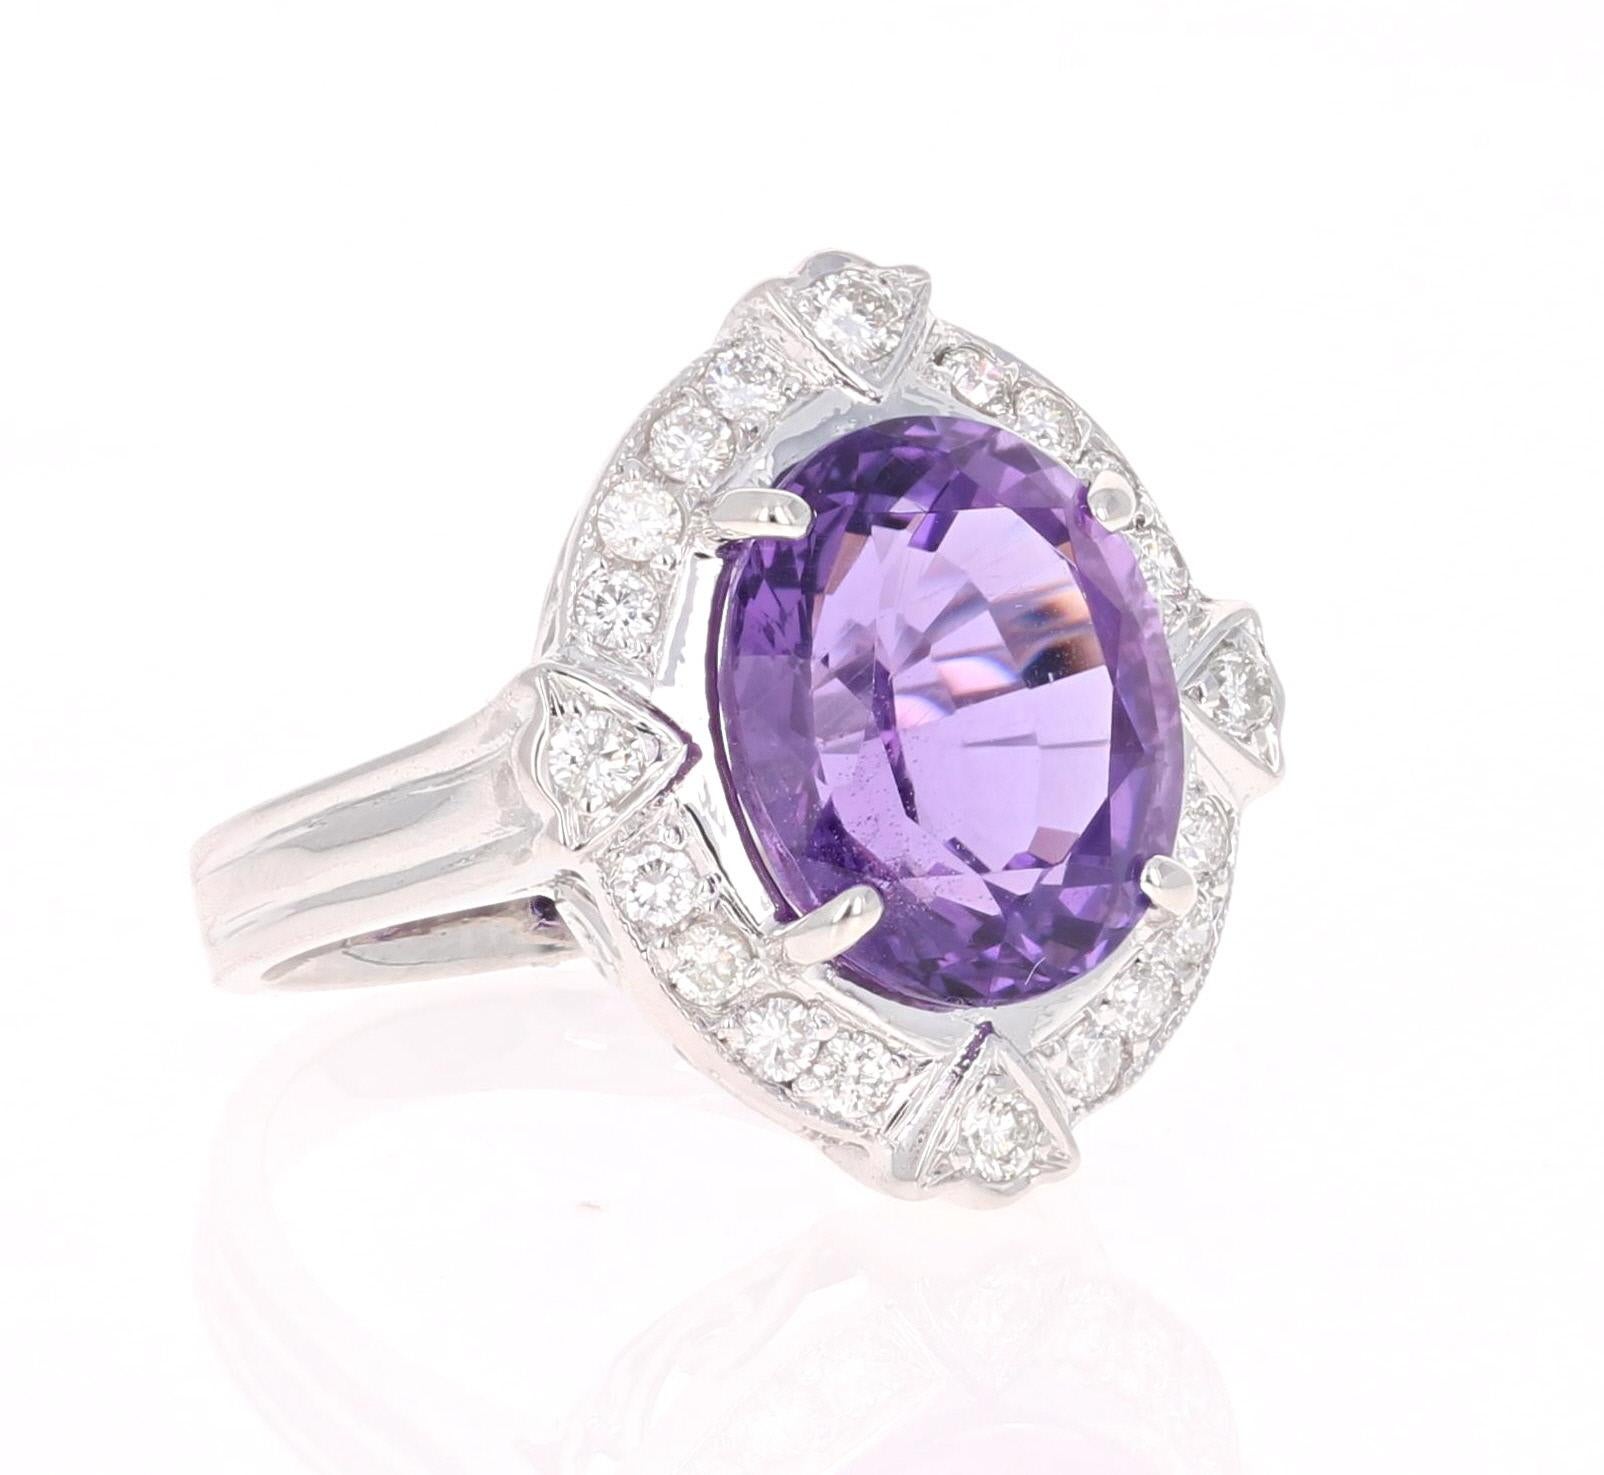 This beautiful Art-Deco inspired ring has a 6.82 carat Oval Cut Amethyst set in the center and is surrounded by 20 Round Cut Diamonds that weigh 0.61 carats.  The total weight of the ring is 7.43 carats.  

The ring is made in 14K White Gold and